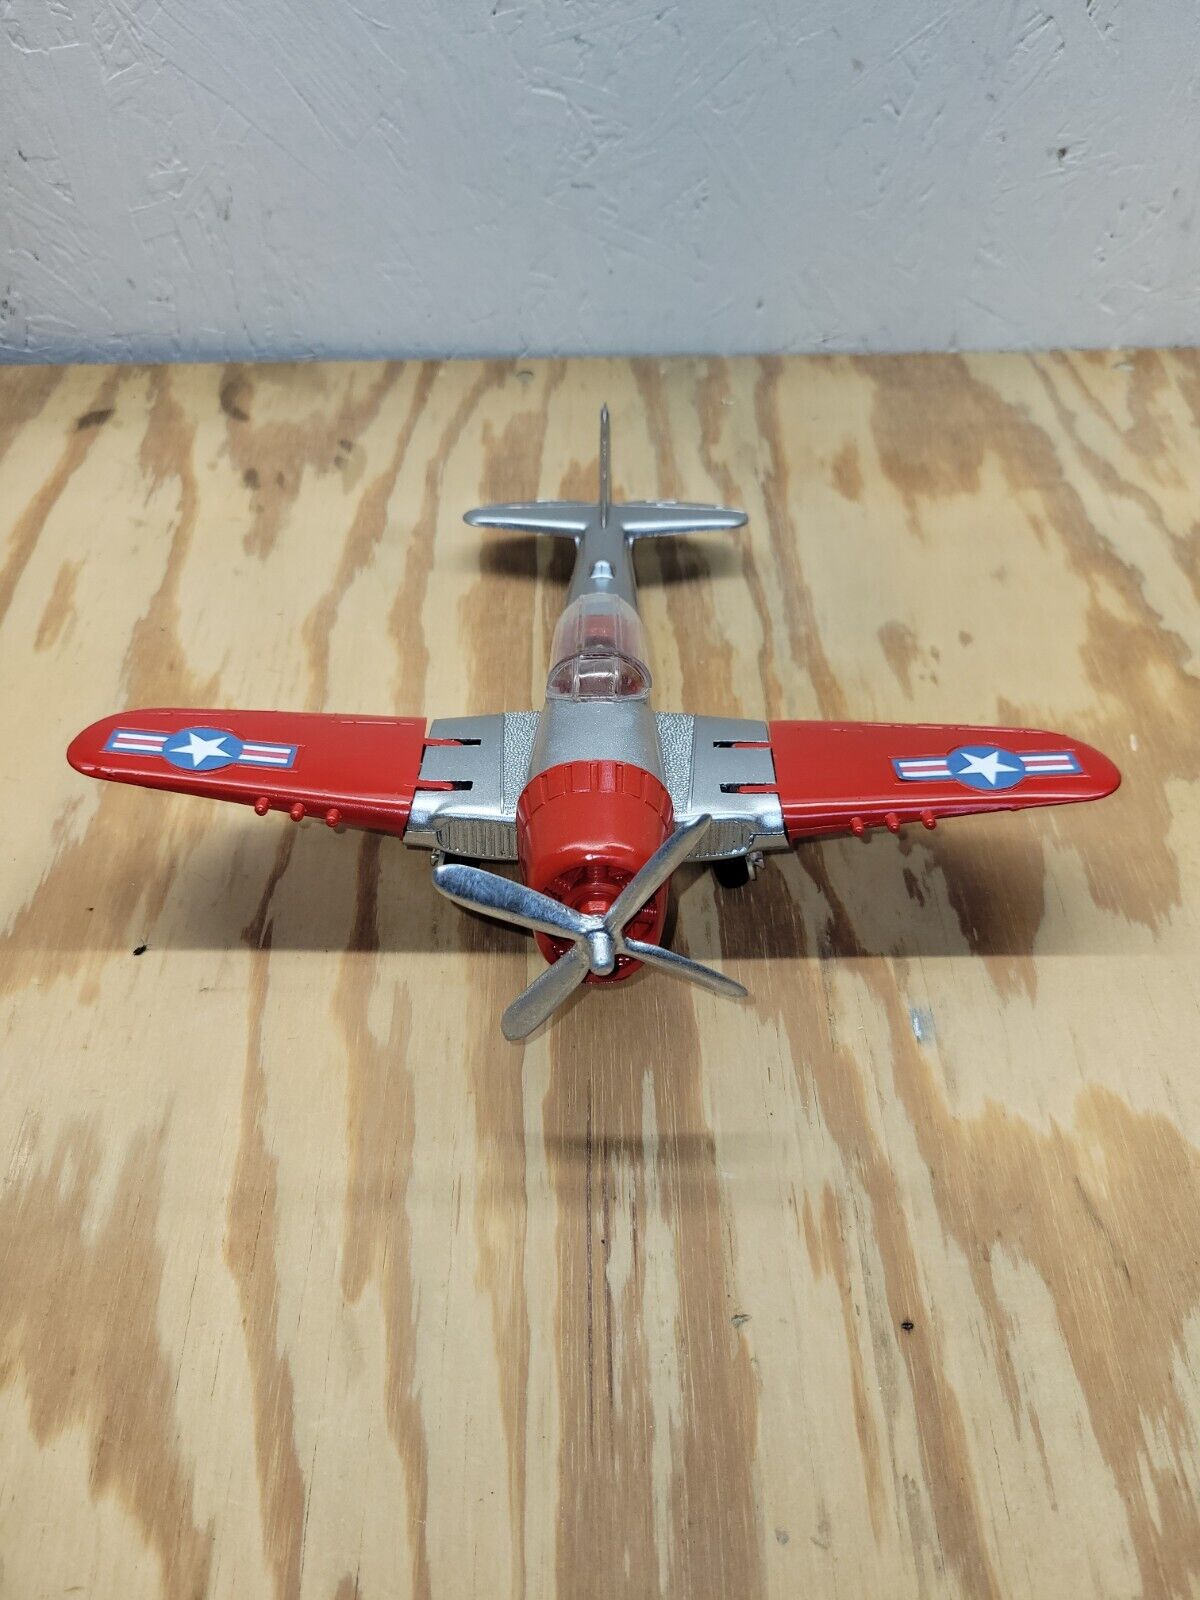 Vintage Hubley Kiddie Toy Airplane Fighter Bomber #495  Great Christmas Gift